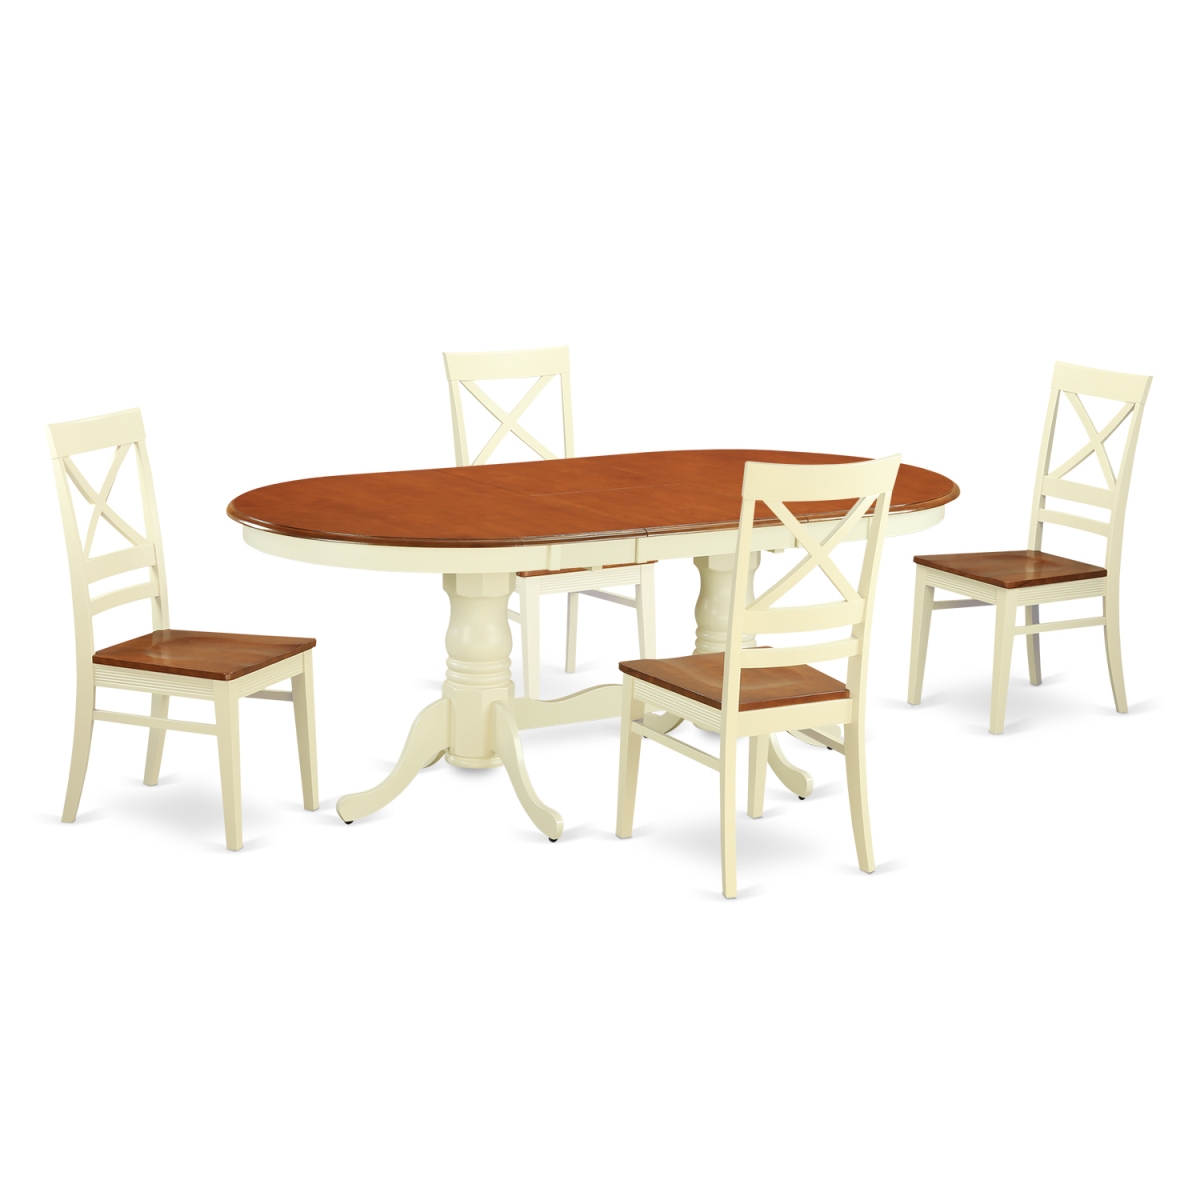 PLQU5-WHI-W Wood Seat Dining Set with 4 Table & 4 Chairs, Buttermilk & Cherry - 5 Piece -  East West Furniture